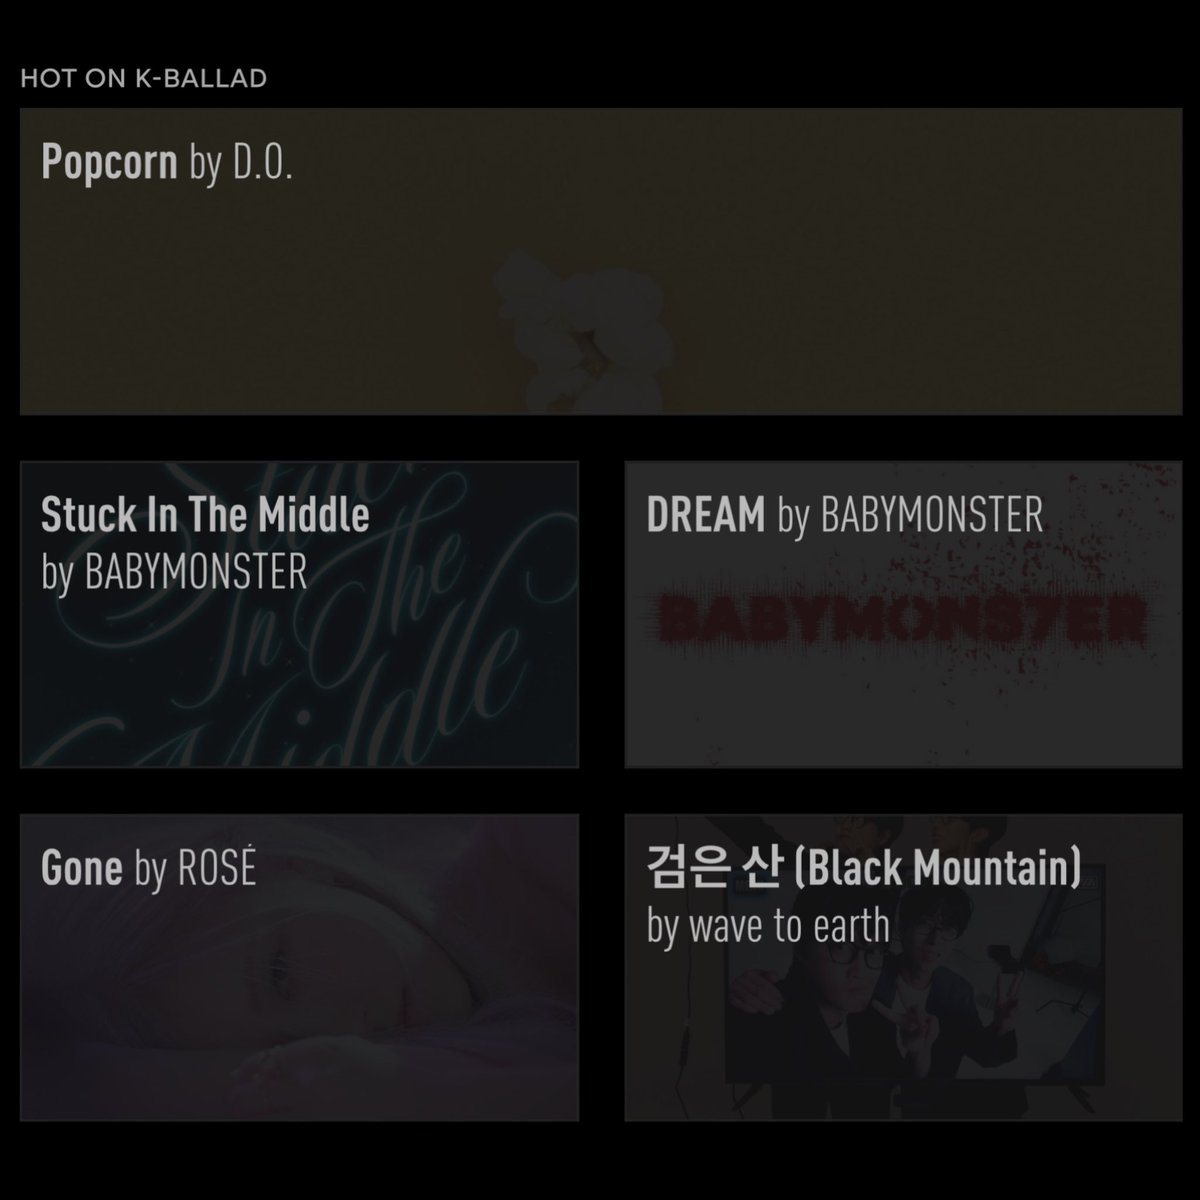 #GeniusCharts | D.O. (#DOHKYUNGSOO) of EXO earns his fourth #1 on the daily K-Ballad chart in Genius Korea with pre-release single “Popcorn”!

His previous #1 songs are “별 떨어진다 (I Do),” “내일의 우리 (Ordinary Days)” and “괜찮아도 괜찮아 (That’s okay)”!…